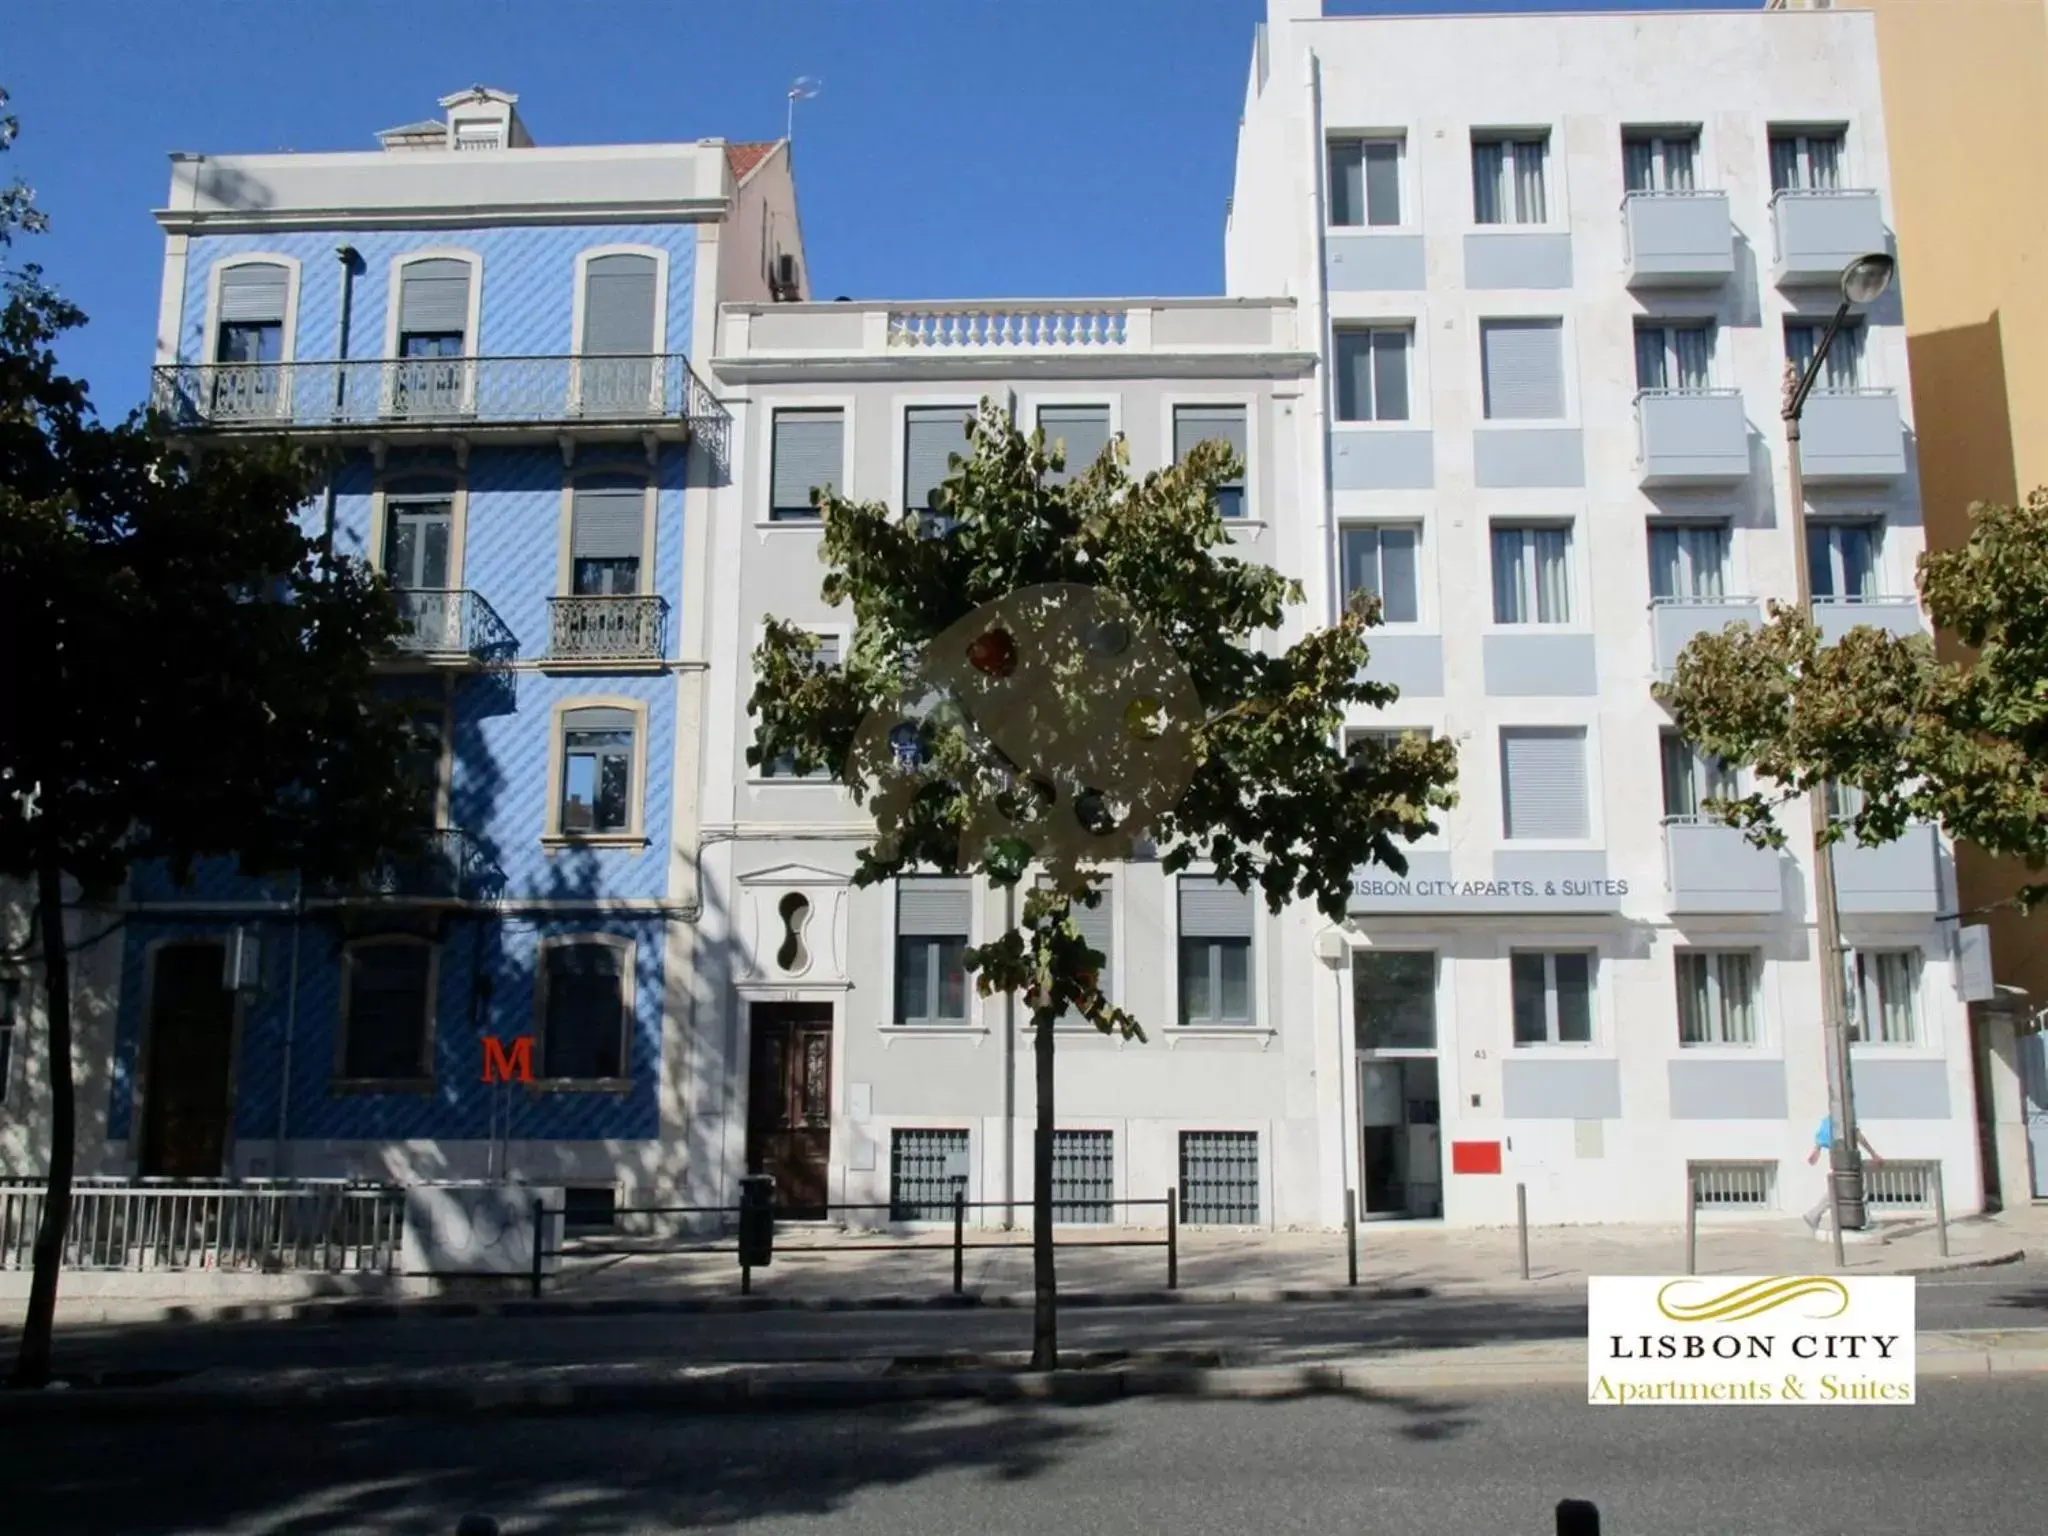 Property Building in Lisbon City Apartments & Suites by City Hotels